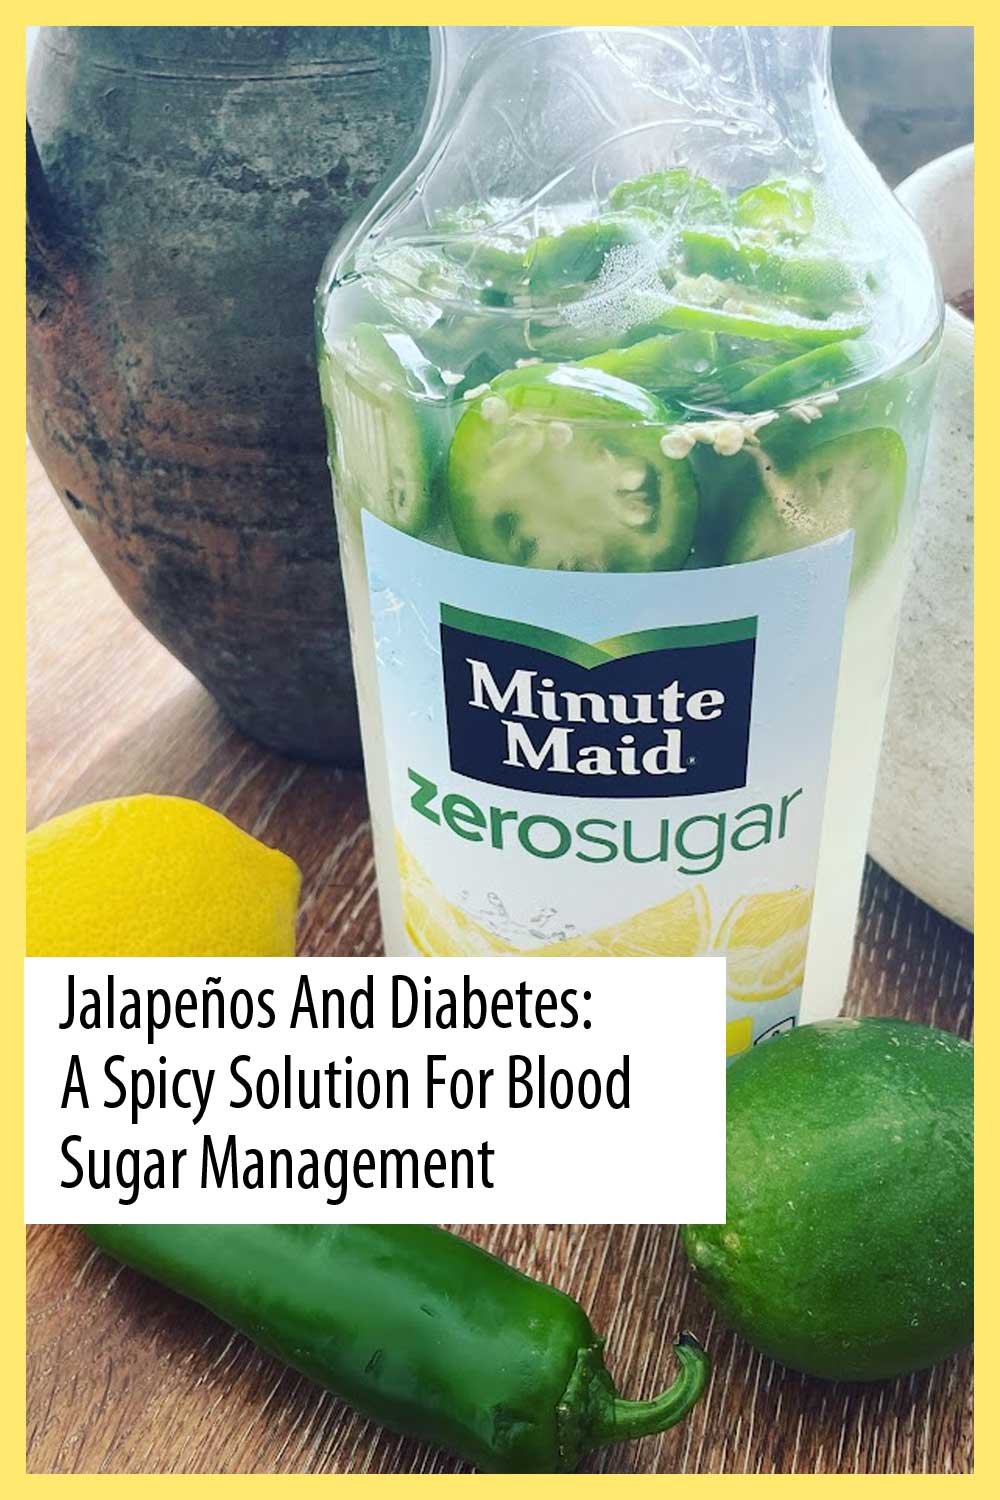 Jalapeños and Diabetes: A Spicy Solution for Blood Sugar Management